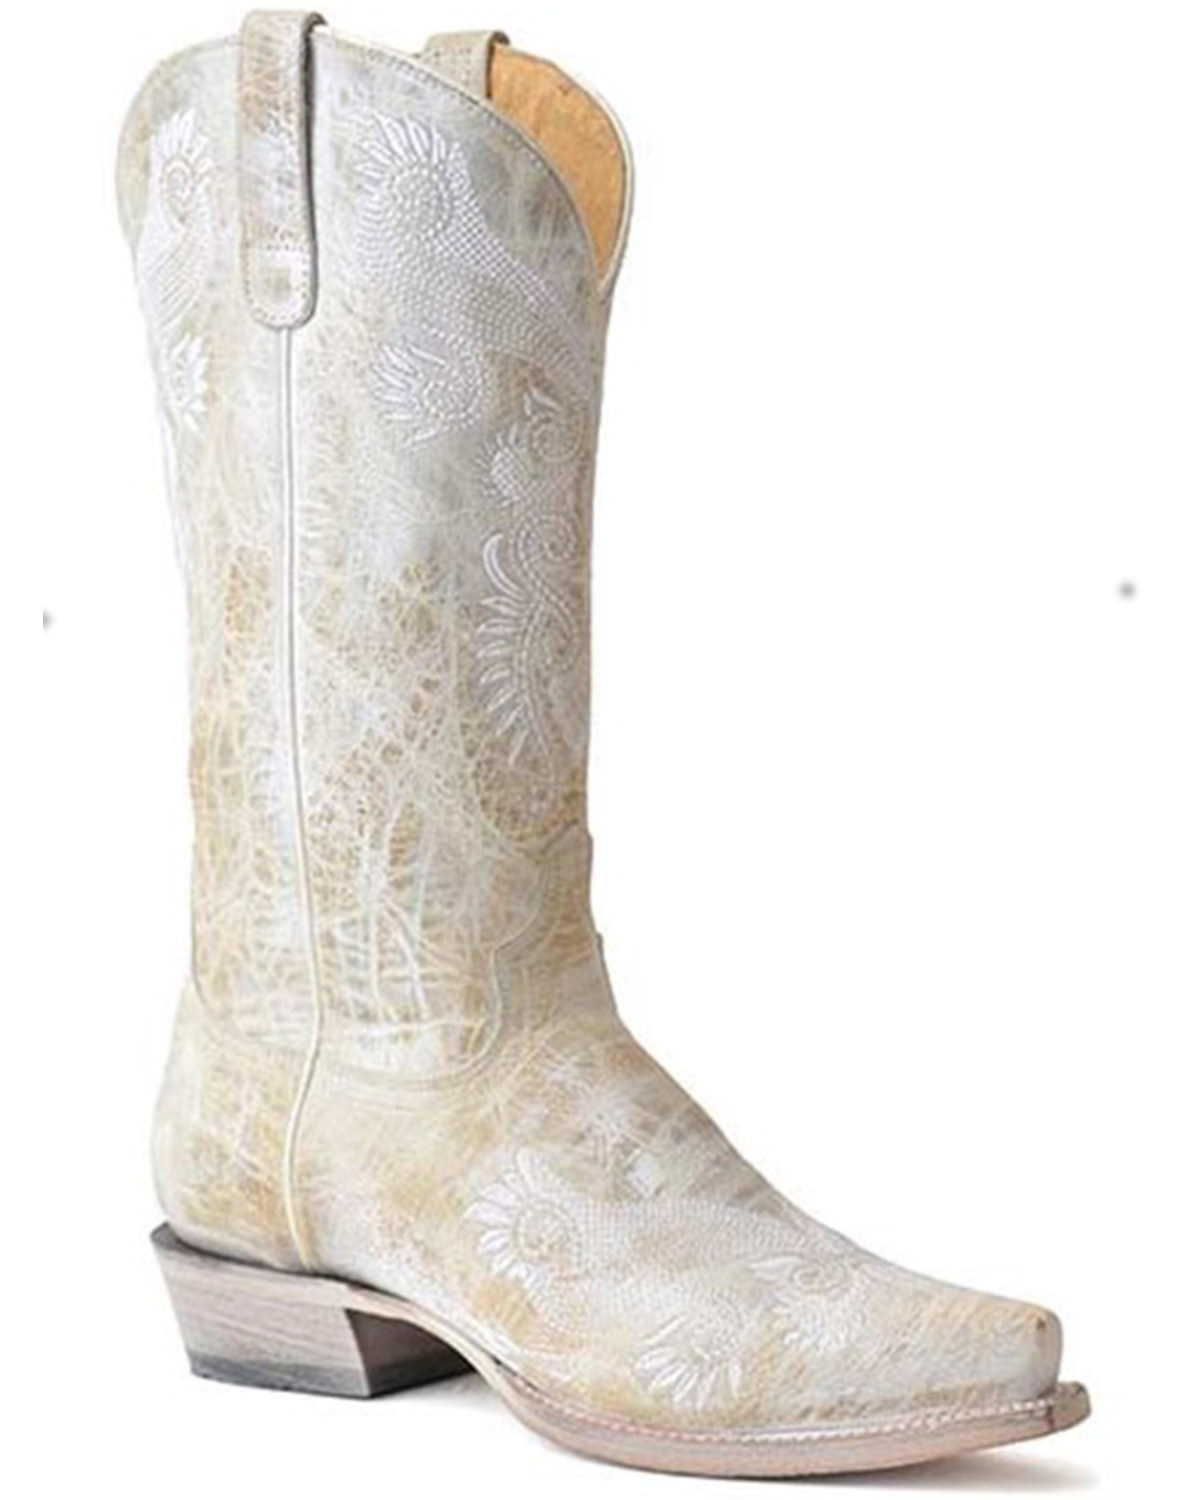 Roper Women's Wedding Vintage Embroidered Western Boots - Snip Toe